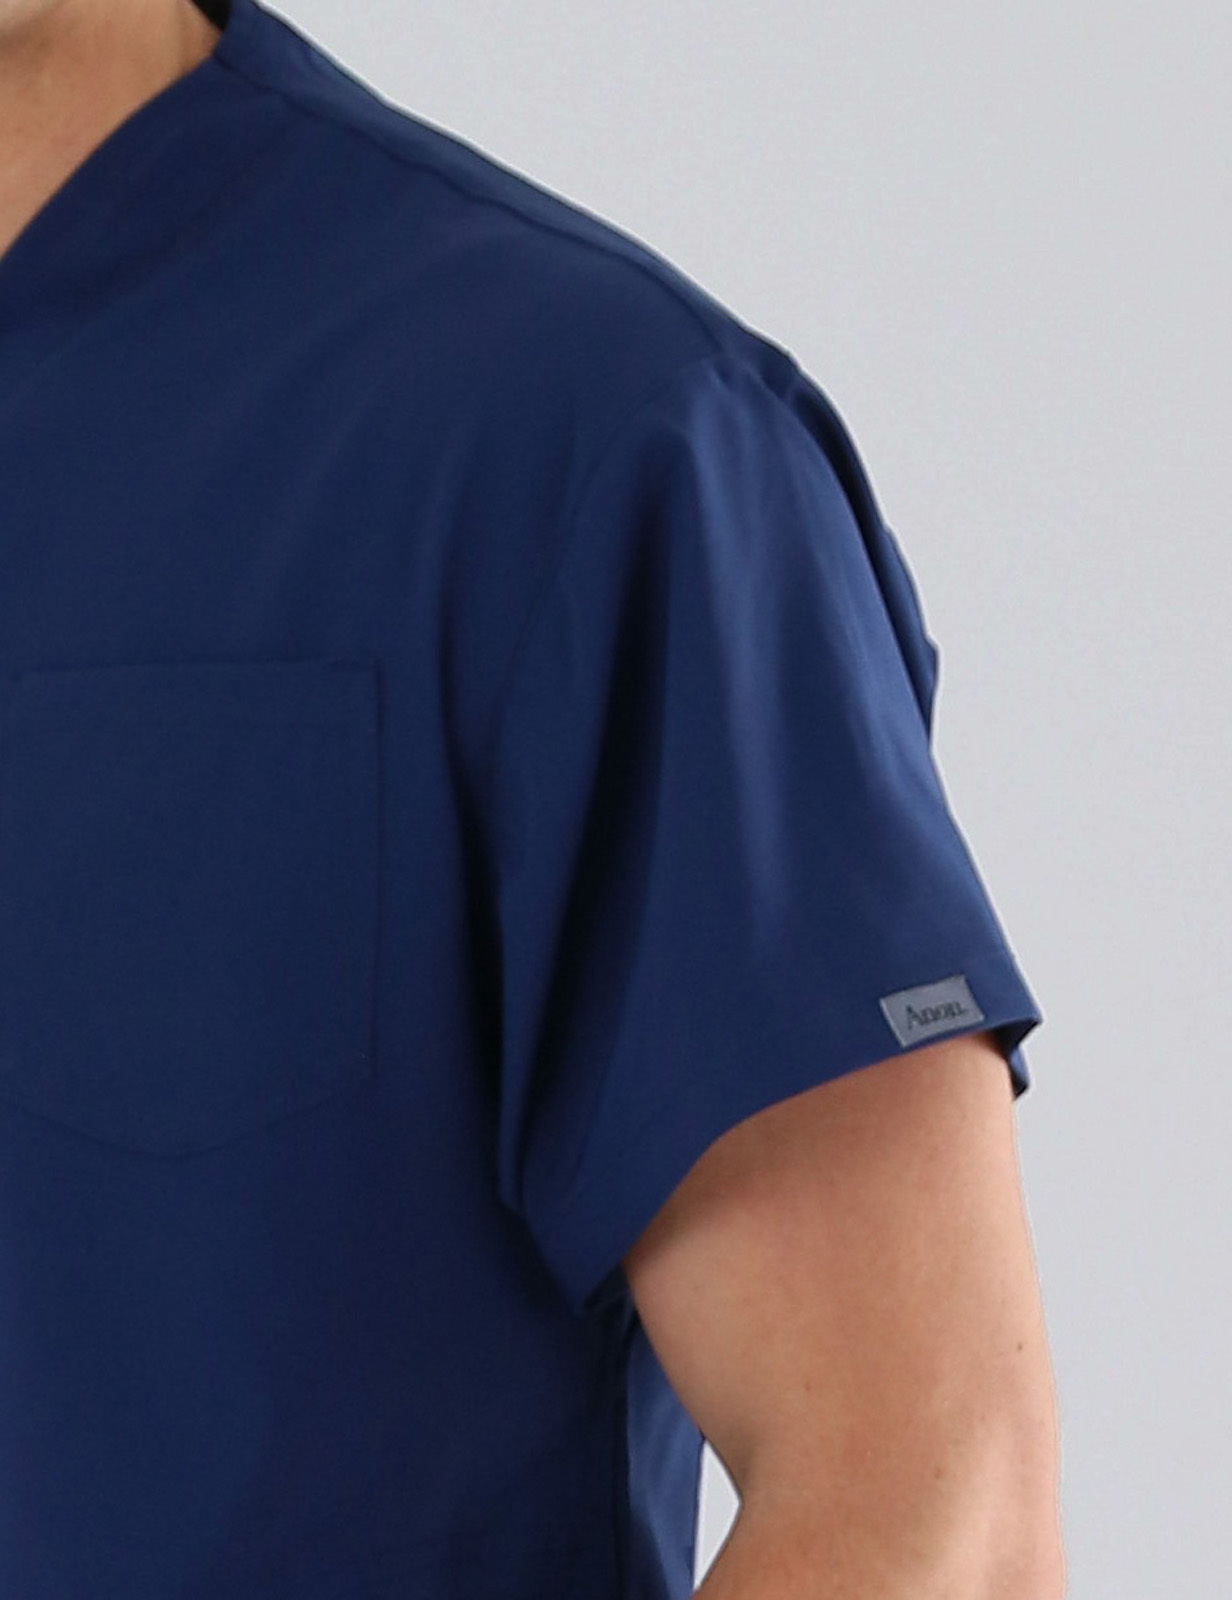 Anon Men's Scrub Top (Stealth Collection) Poly/Spandex - Midnight Blue